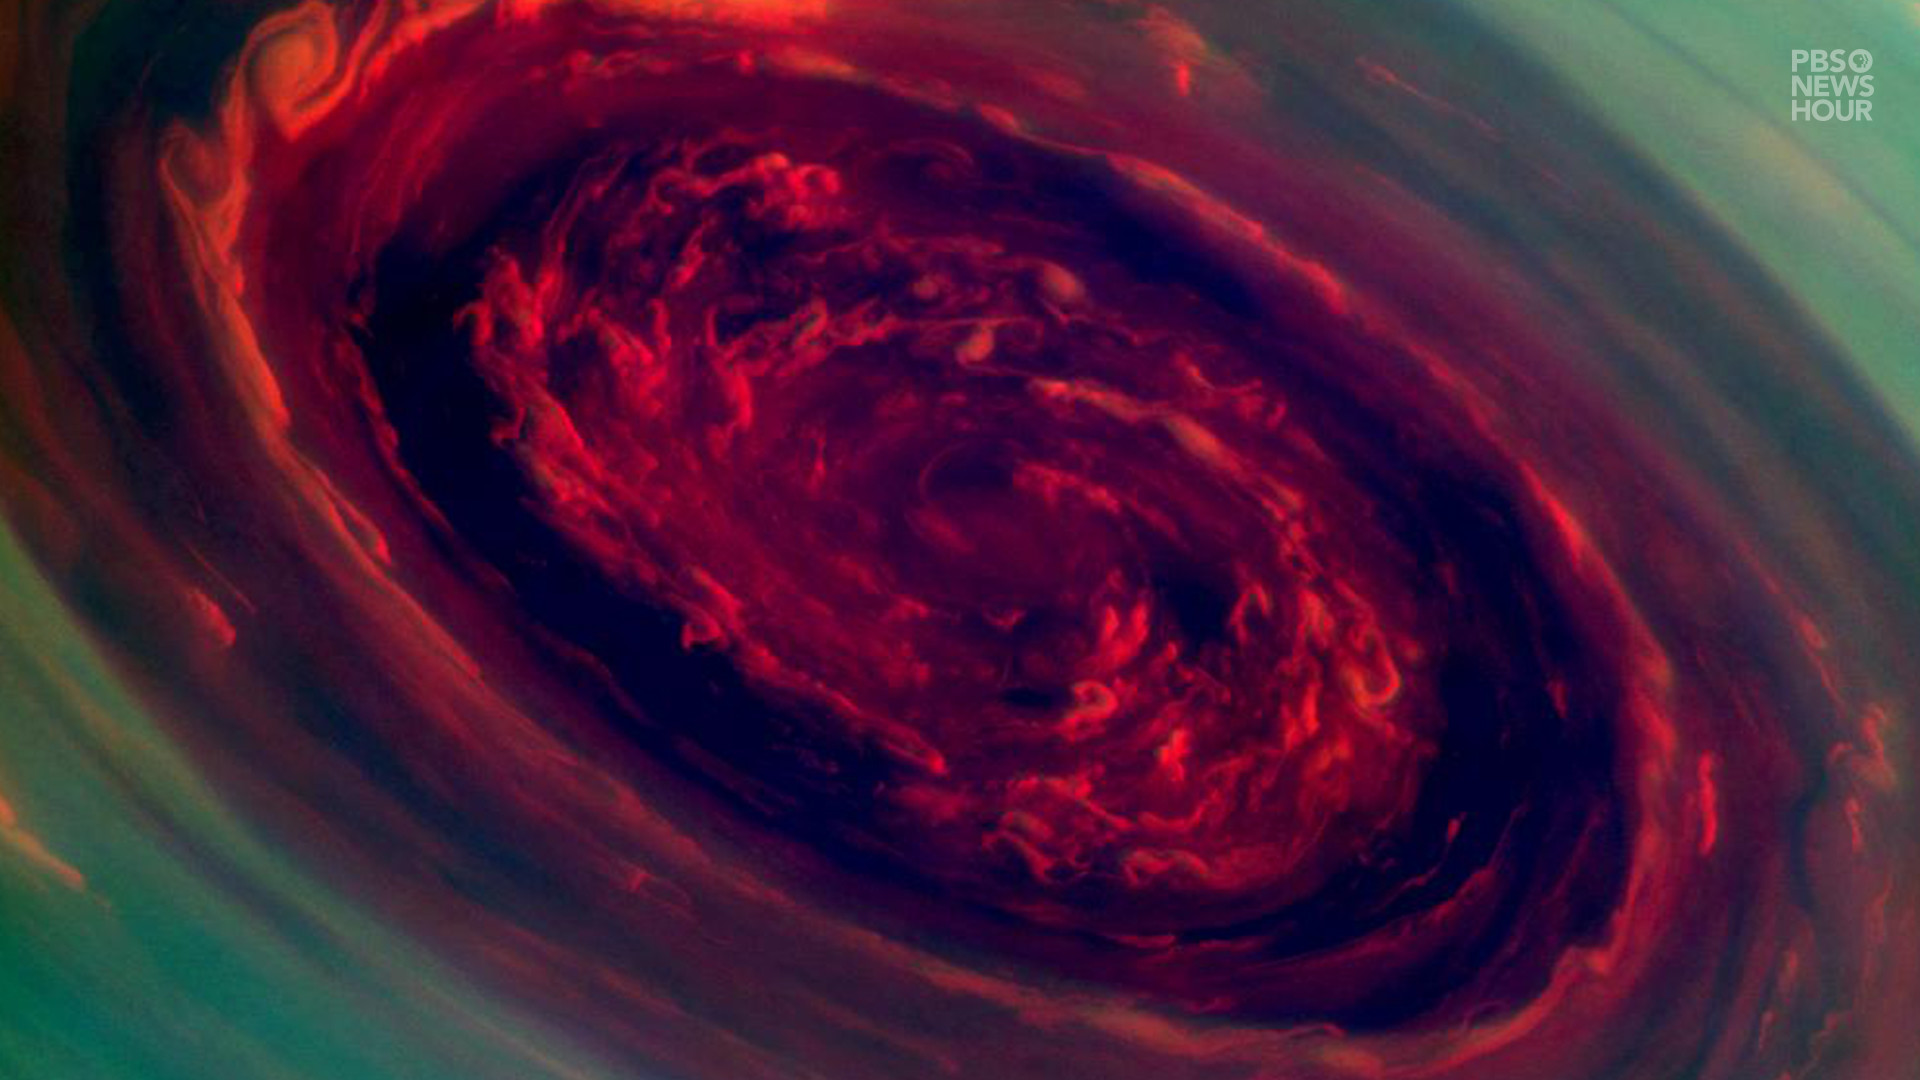 1920x1080 The spinning vortex of Saturn's north polar storm resembles a giant red  rose in this false